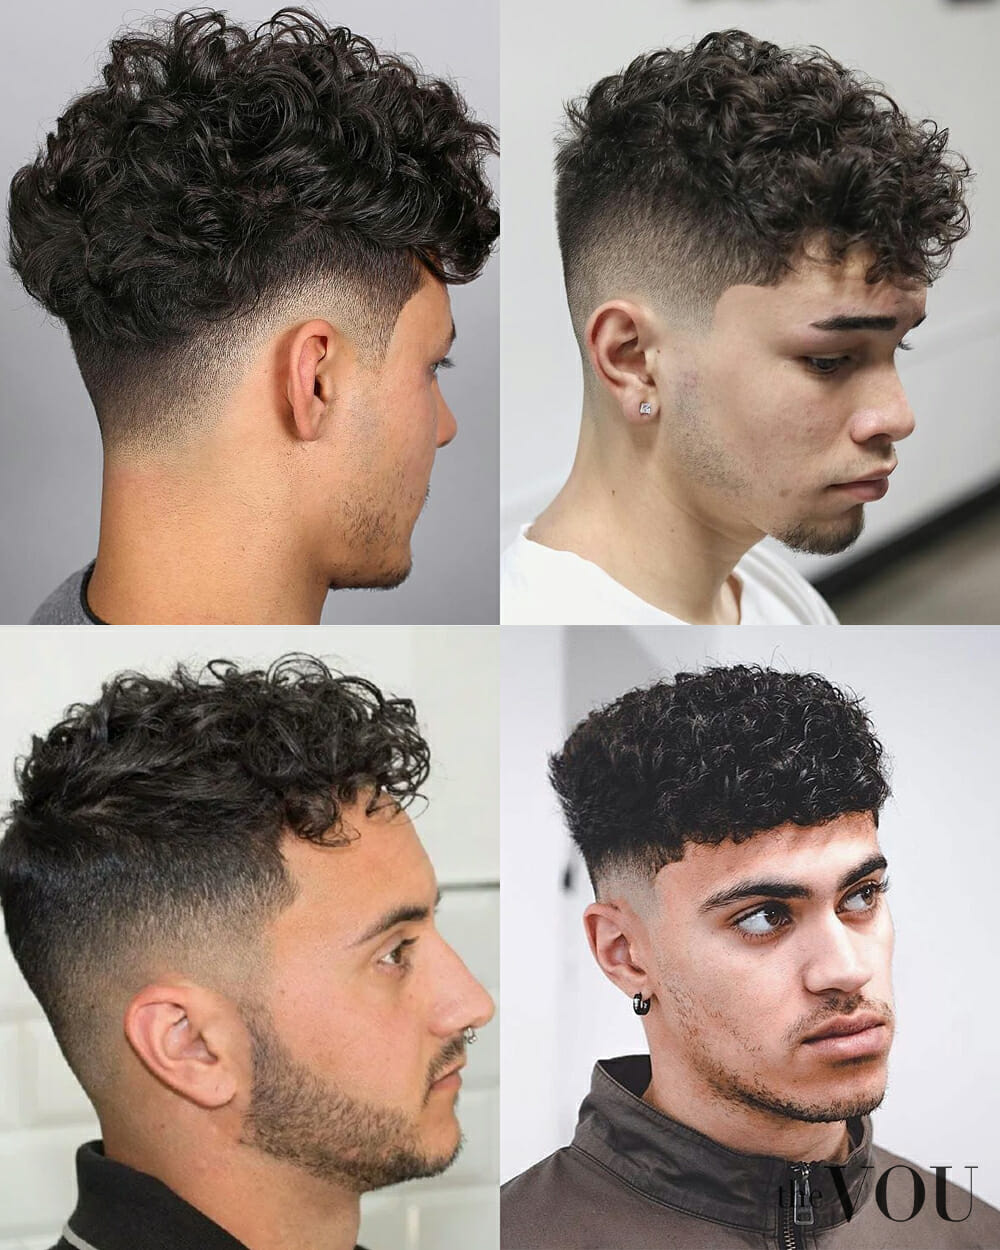 29 Short and Stylish Textured Haircuts for Men